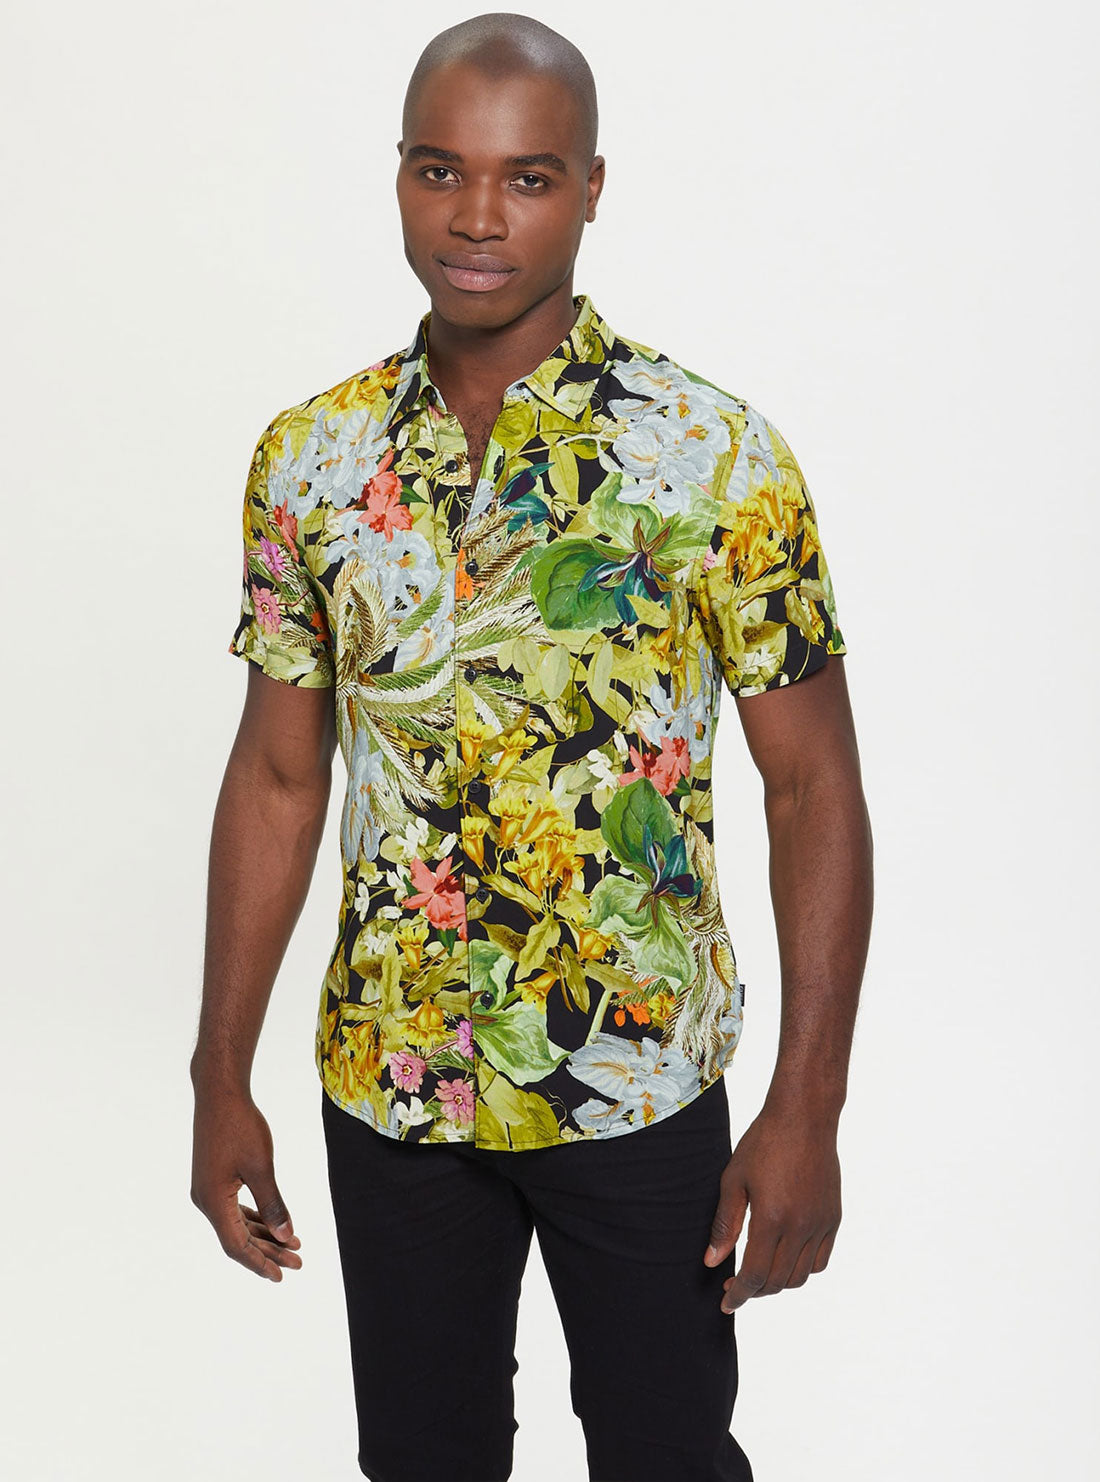 GUESS Men's Eco Storybook Floral Rayon Shirt M2BH22WD4Z2 Front View